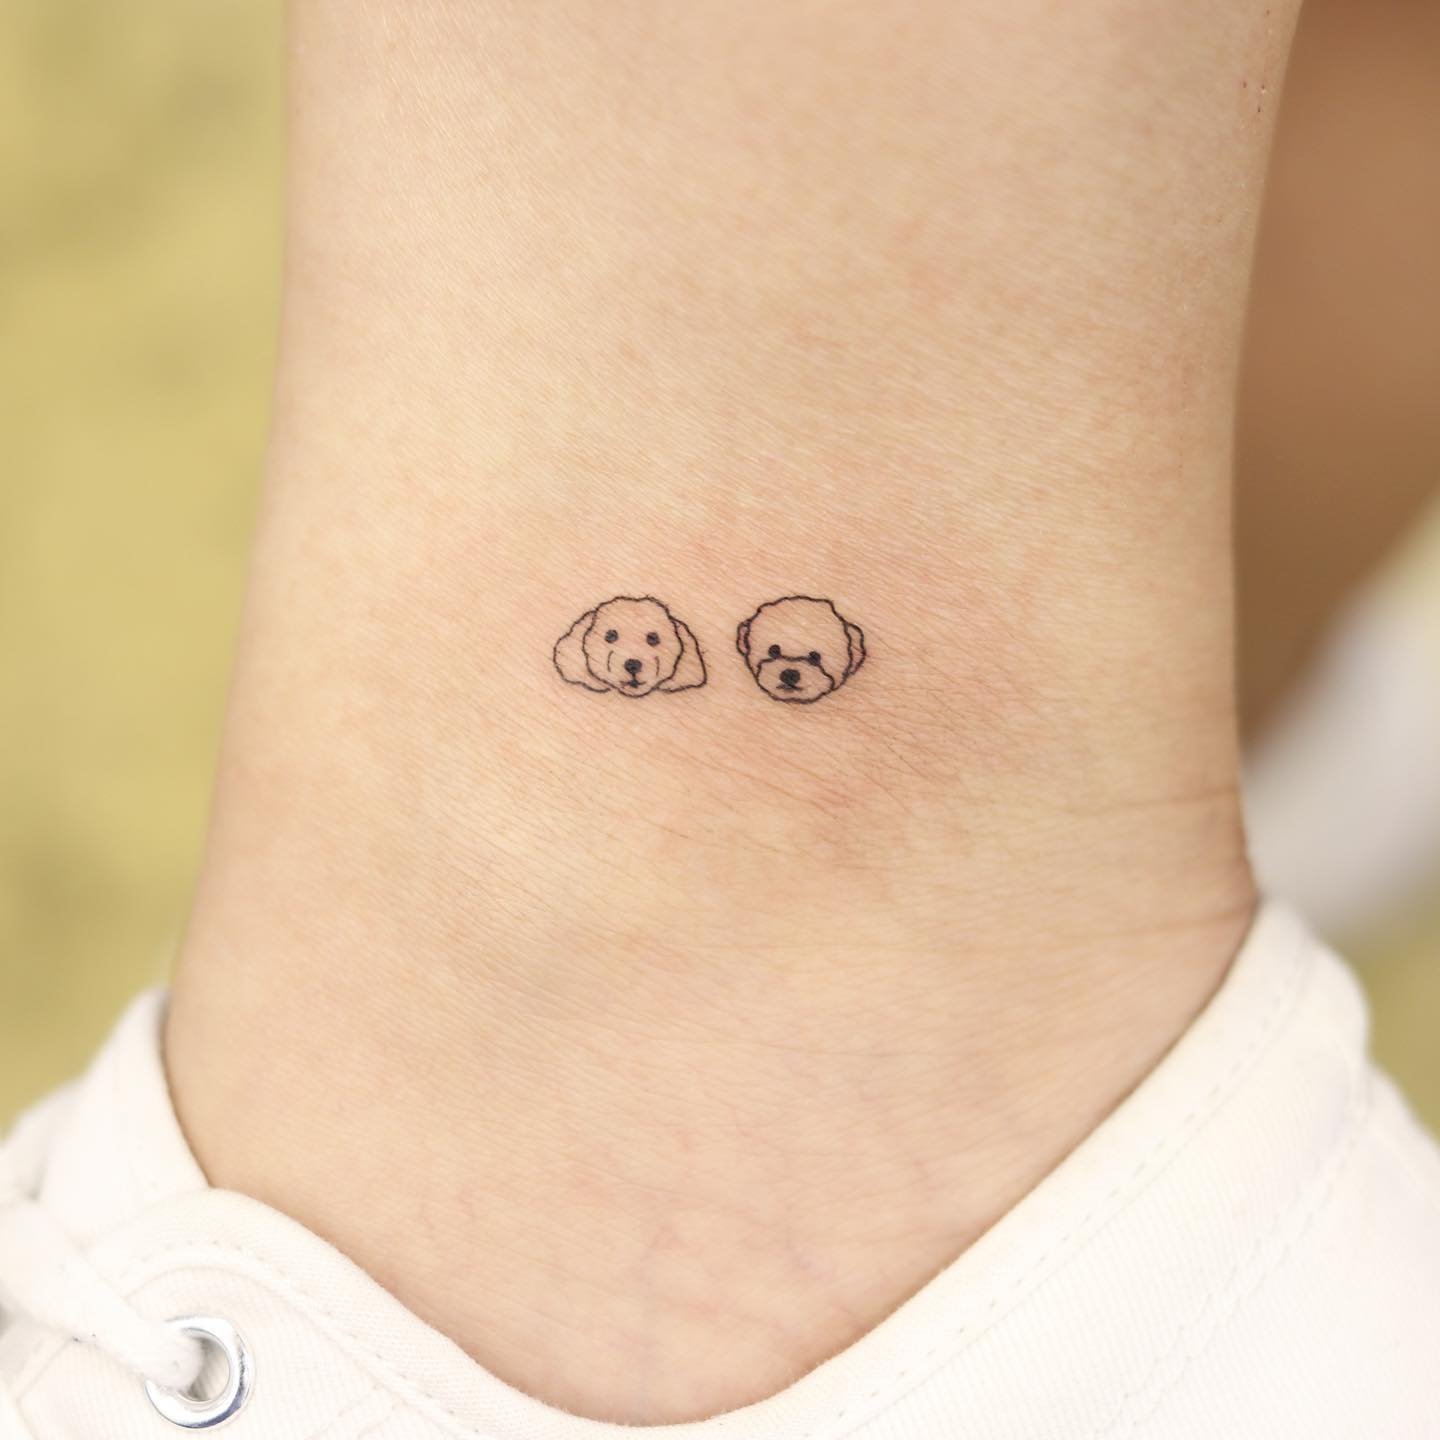 Do you have pets that you truly love and you wish to dedicate a tattoo in their favor? Show that you truly love them and that they’re your favorite little furry pals in the world with this small and cute minimalism idea.